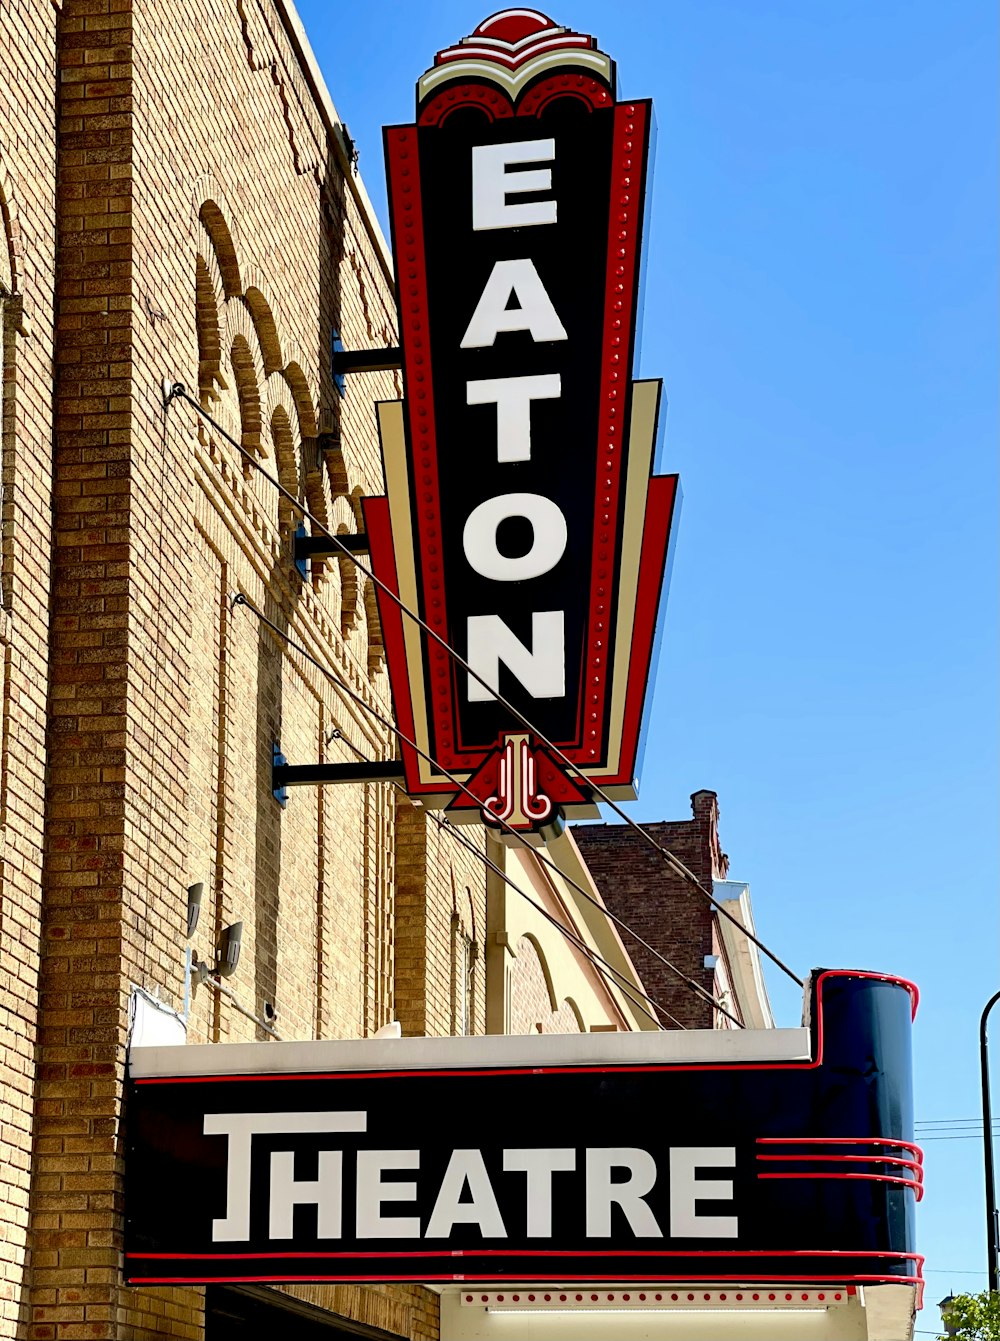 a theater sign on the side of a building